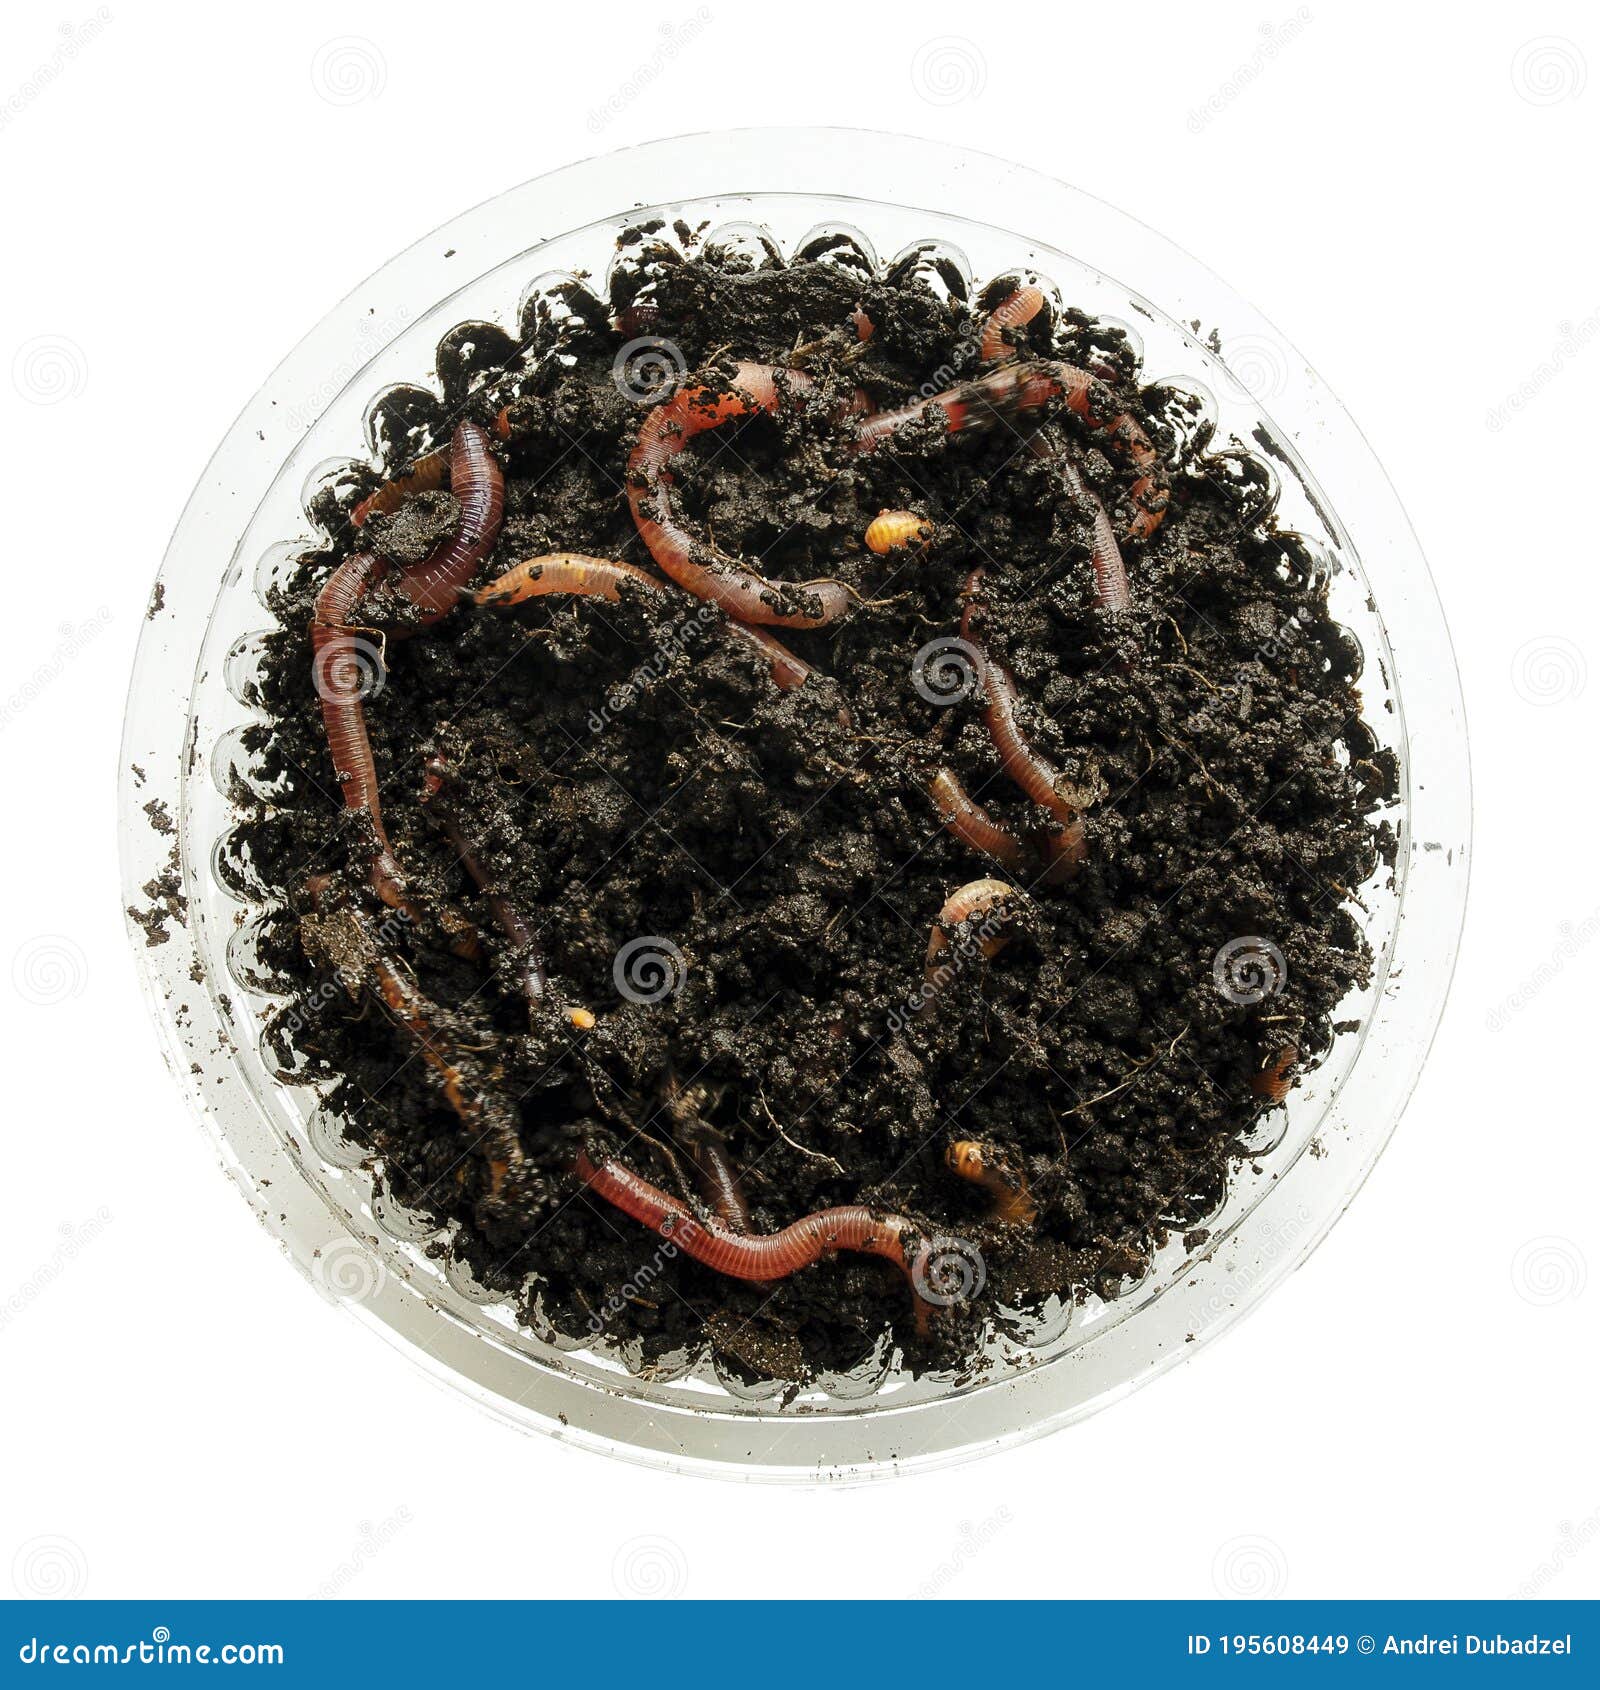 Red Worms in a Box in the Manure Isolated on a White Background